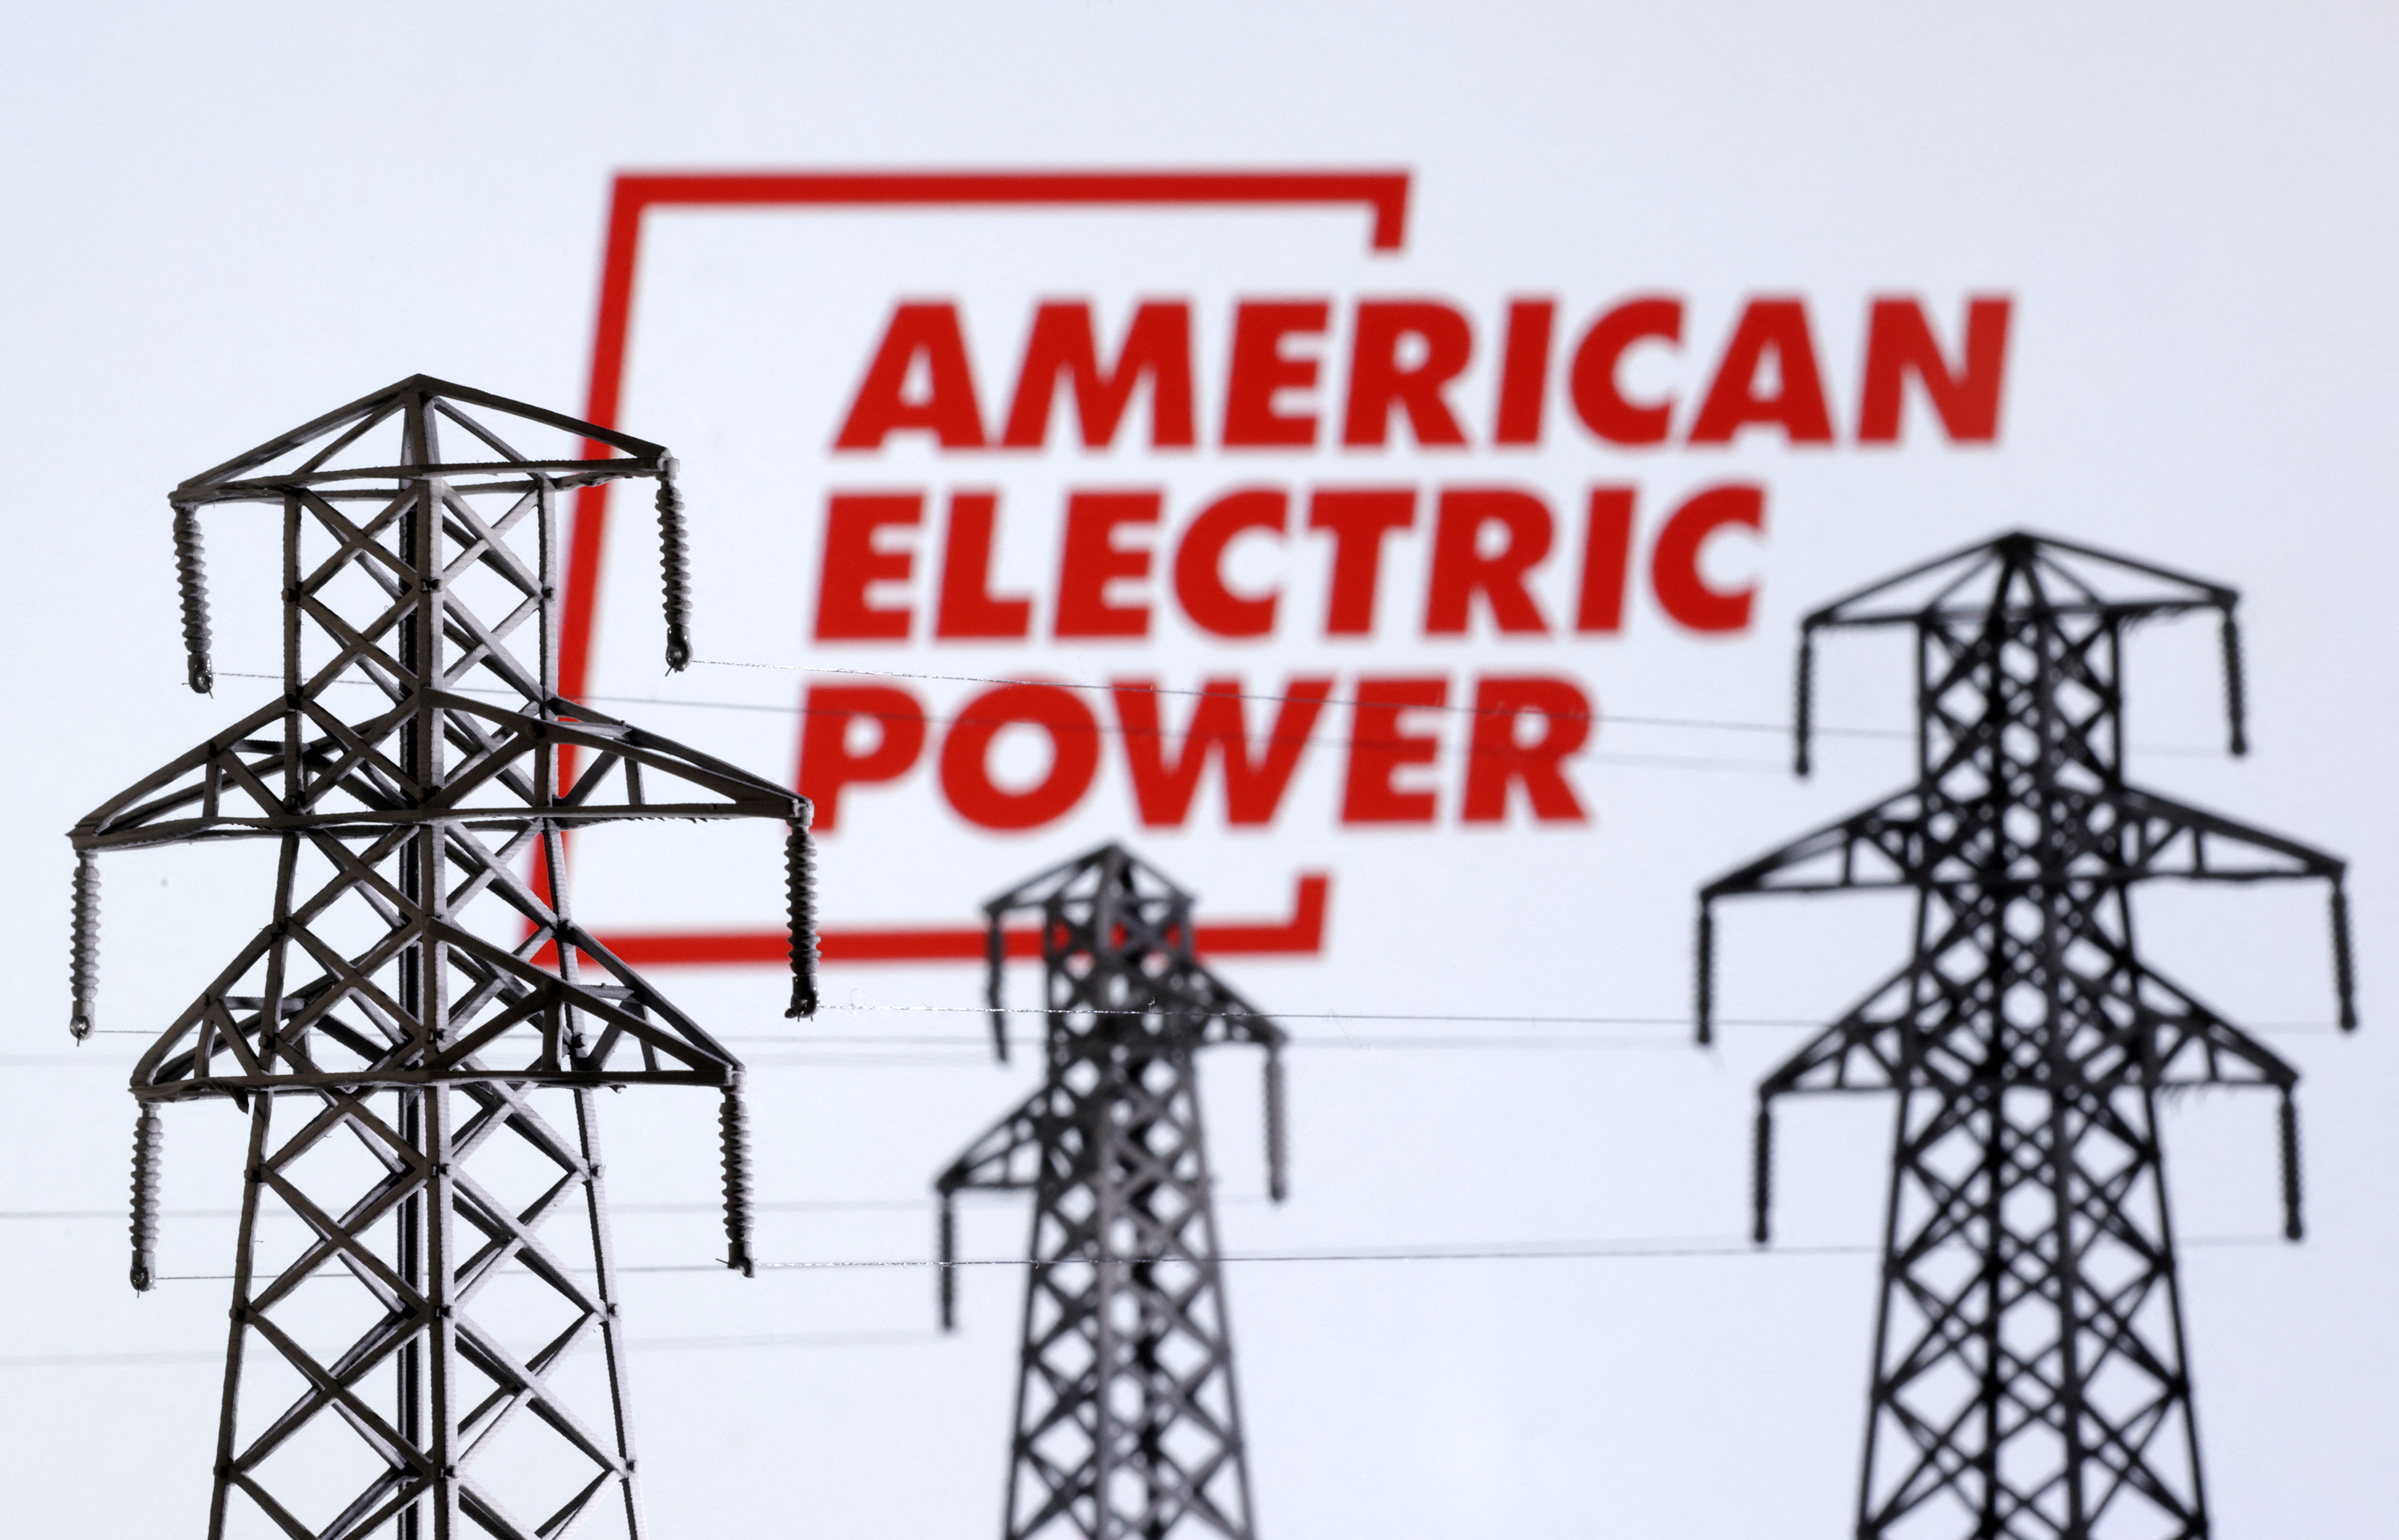 Illustration shows Electric power transmission pylon miniatures and American Electric Power logo